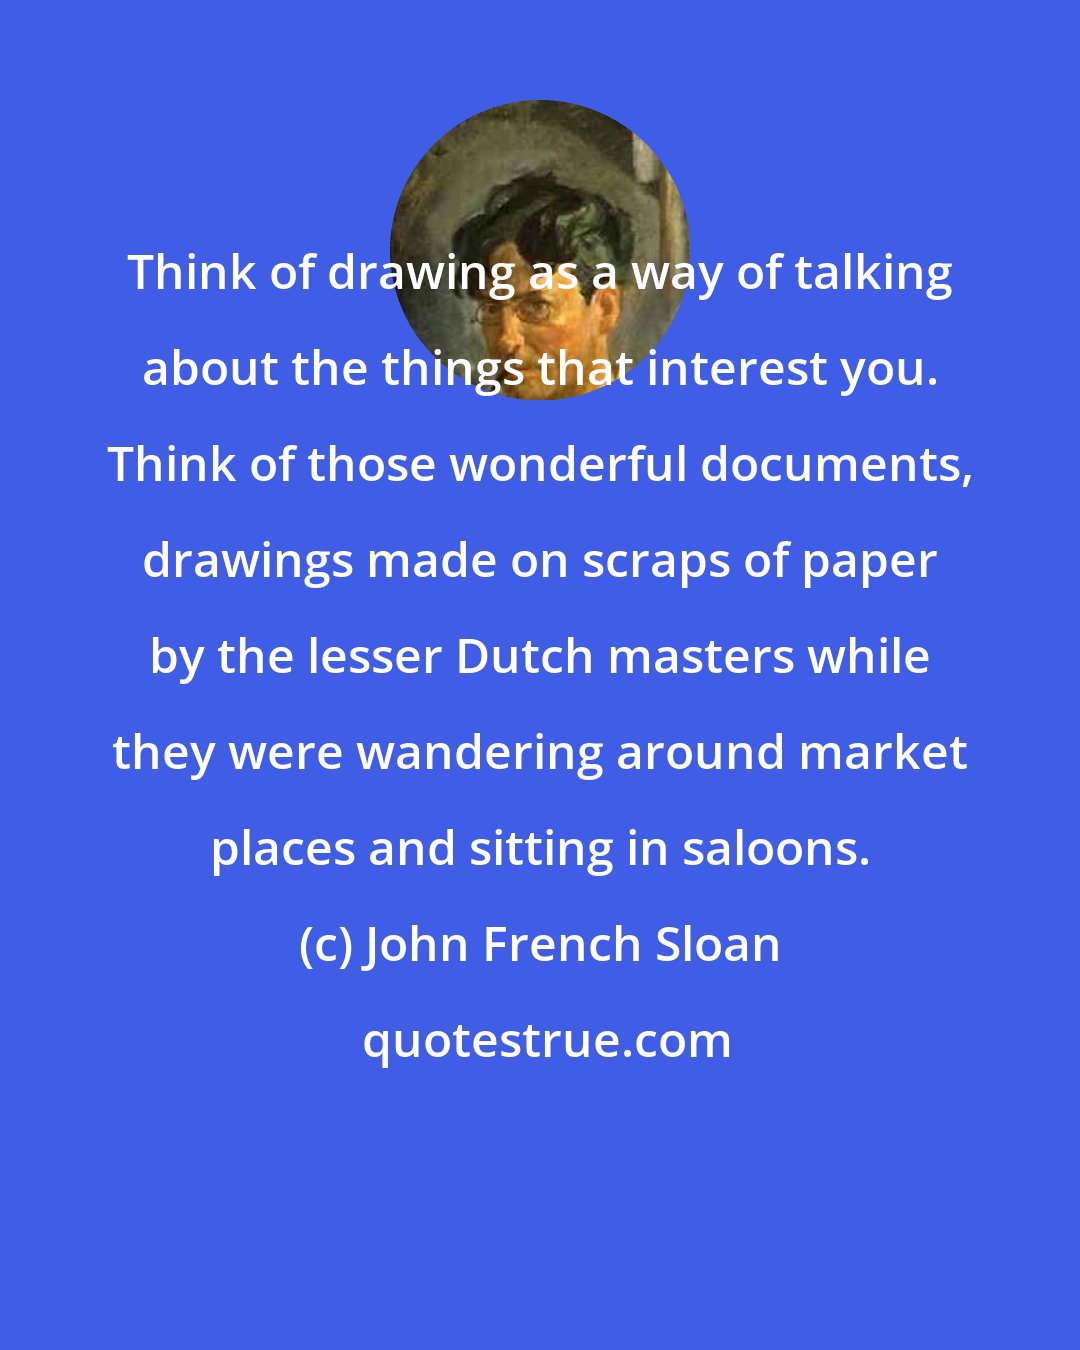 John French Sloan: Think of drawing as a way of talking about the things that interest you. Think of those wonderful documents, drawings made on scraps of paper by the lesser Dutch masters while they were wandering around market places and sitting in saloons.